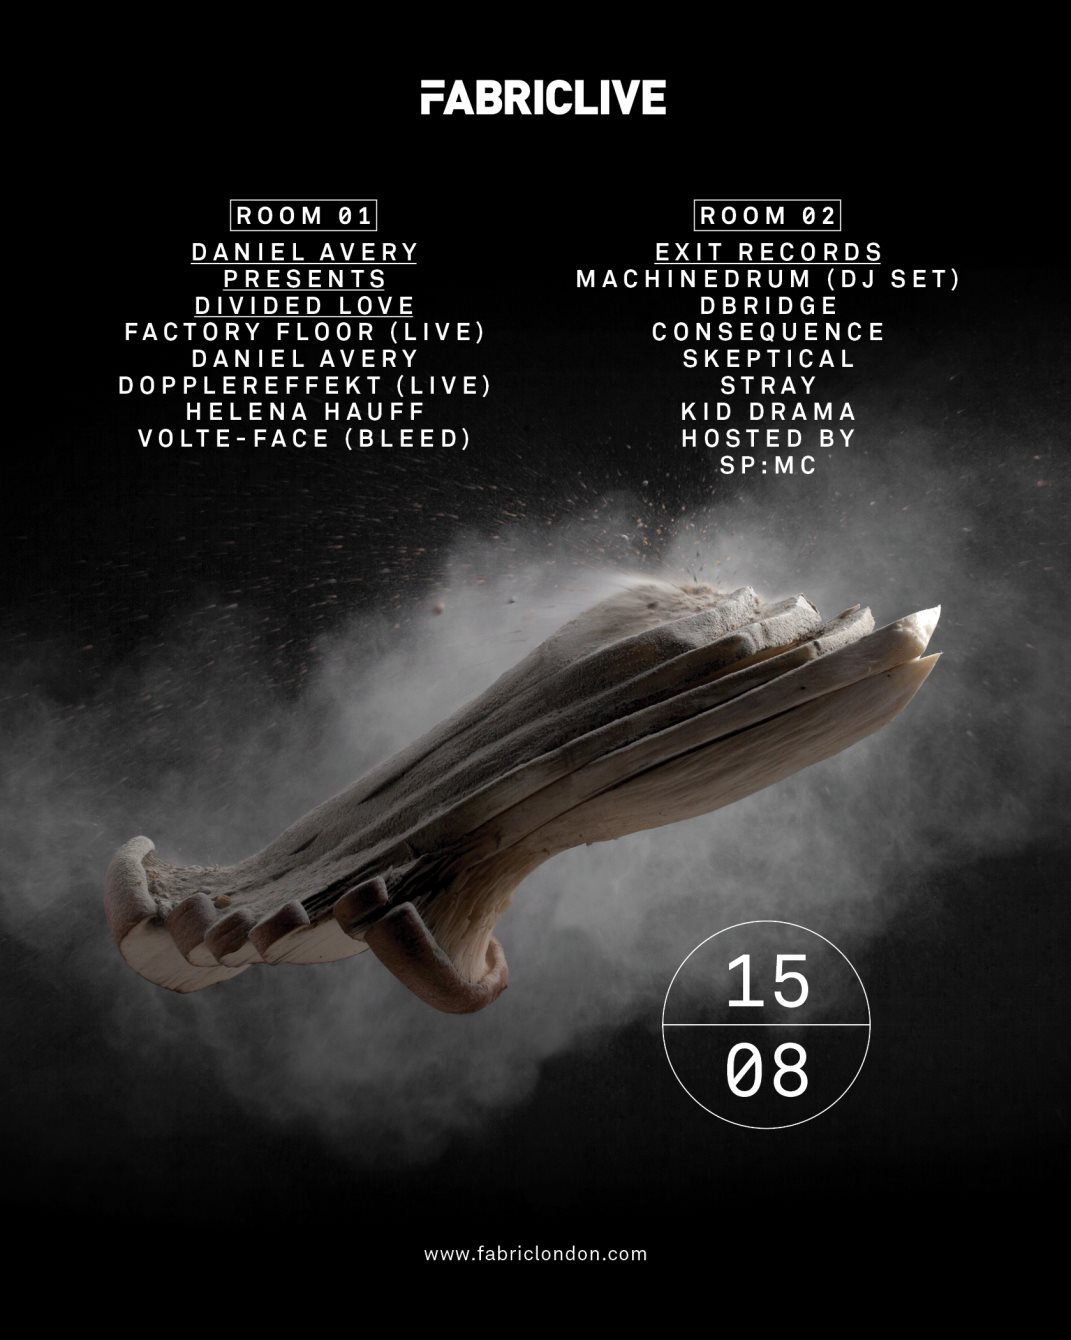 Fabriclive